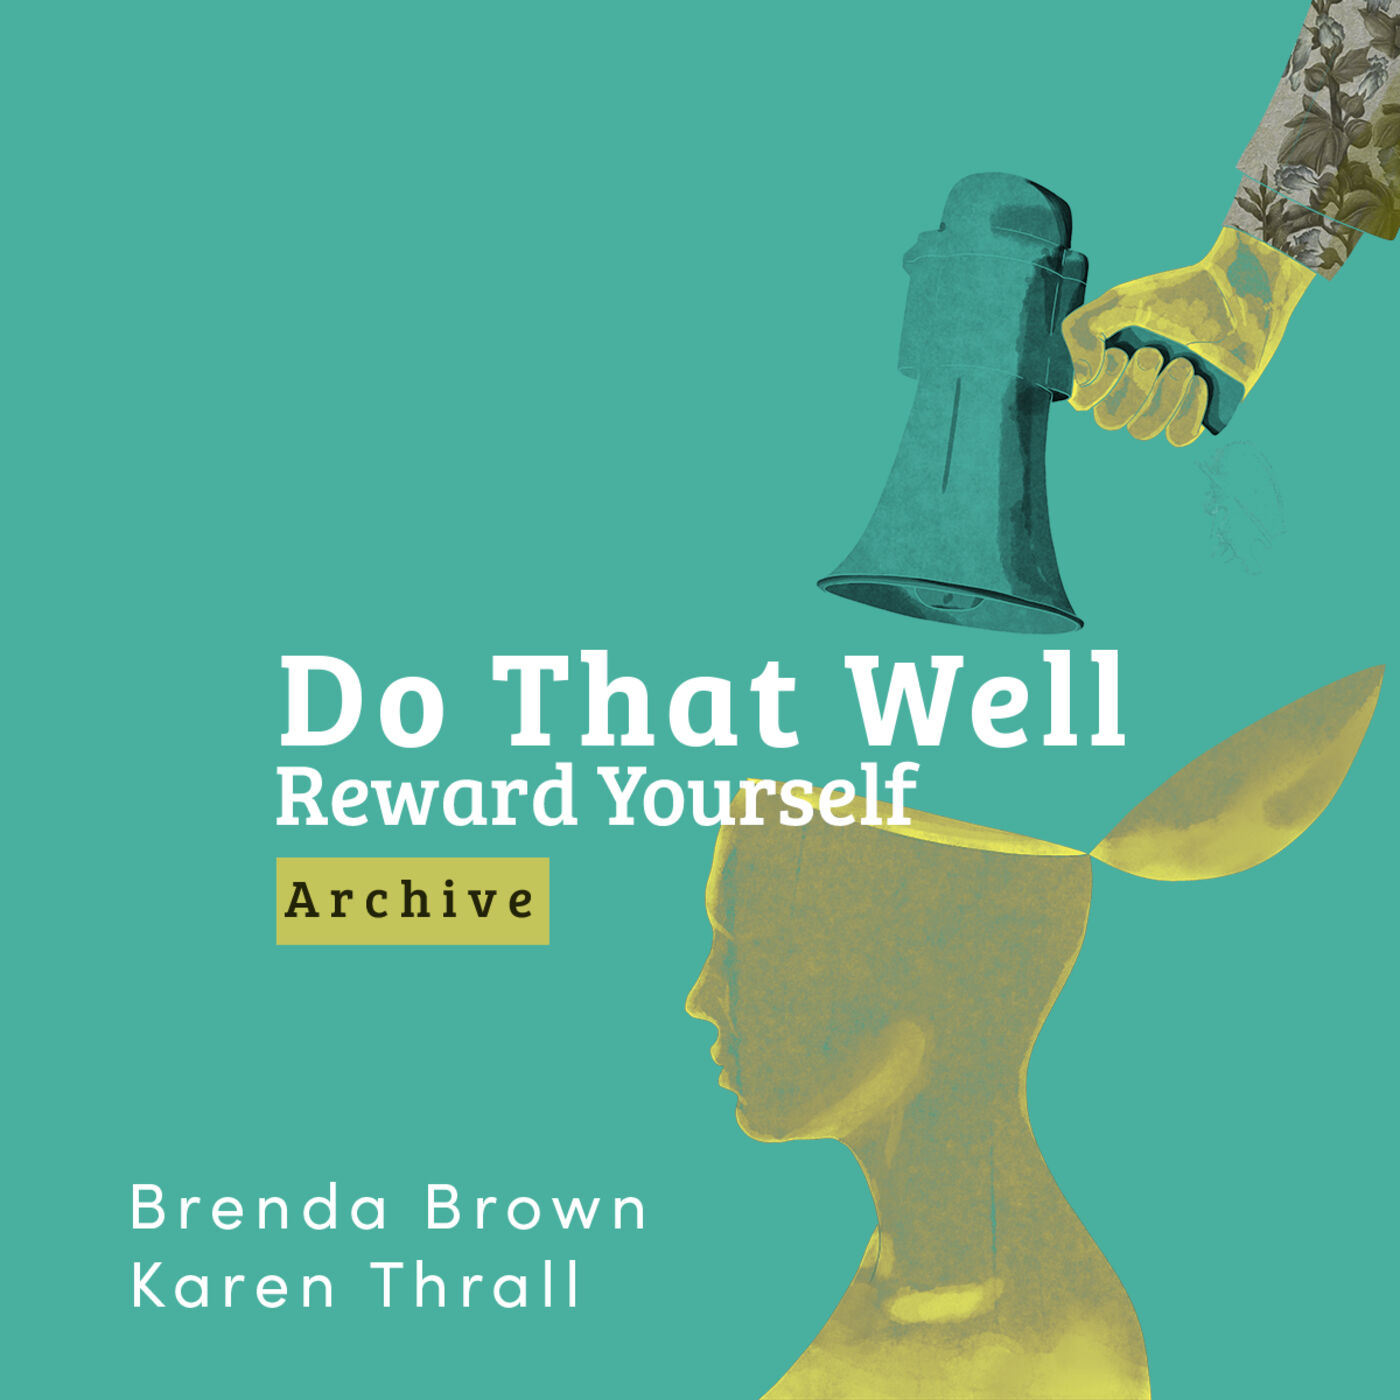 [archive] Do That Well:  Reward Yourself